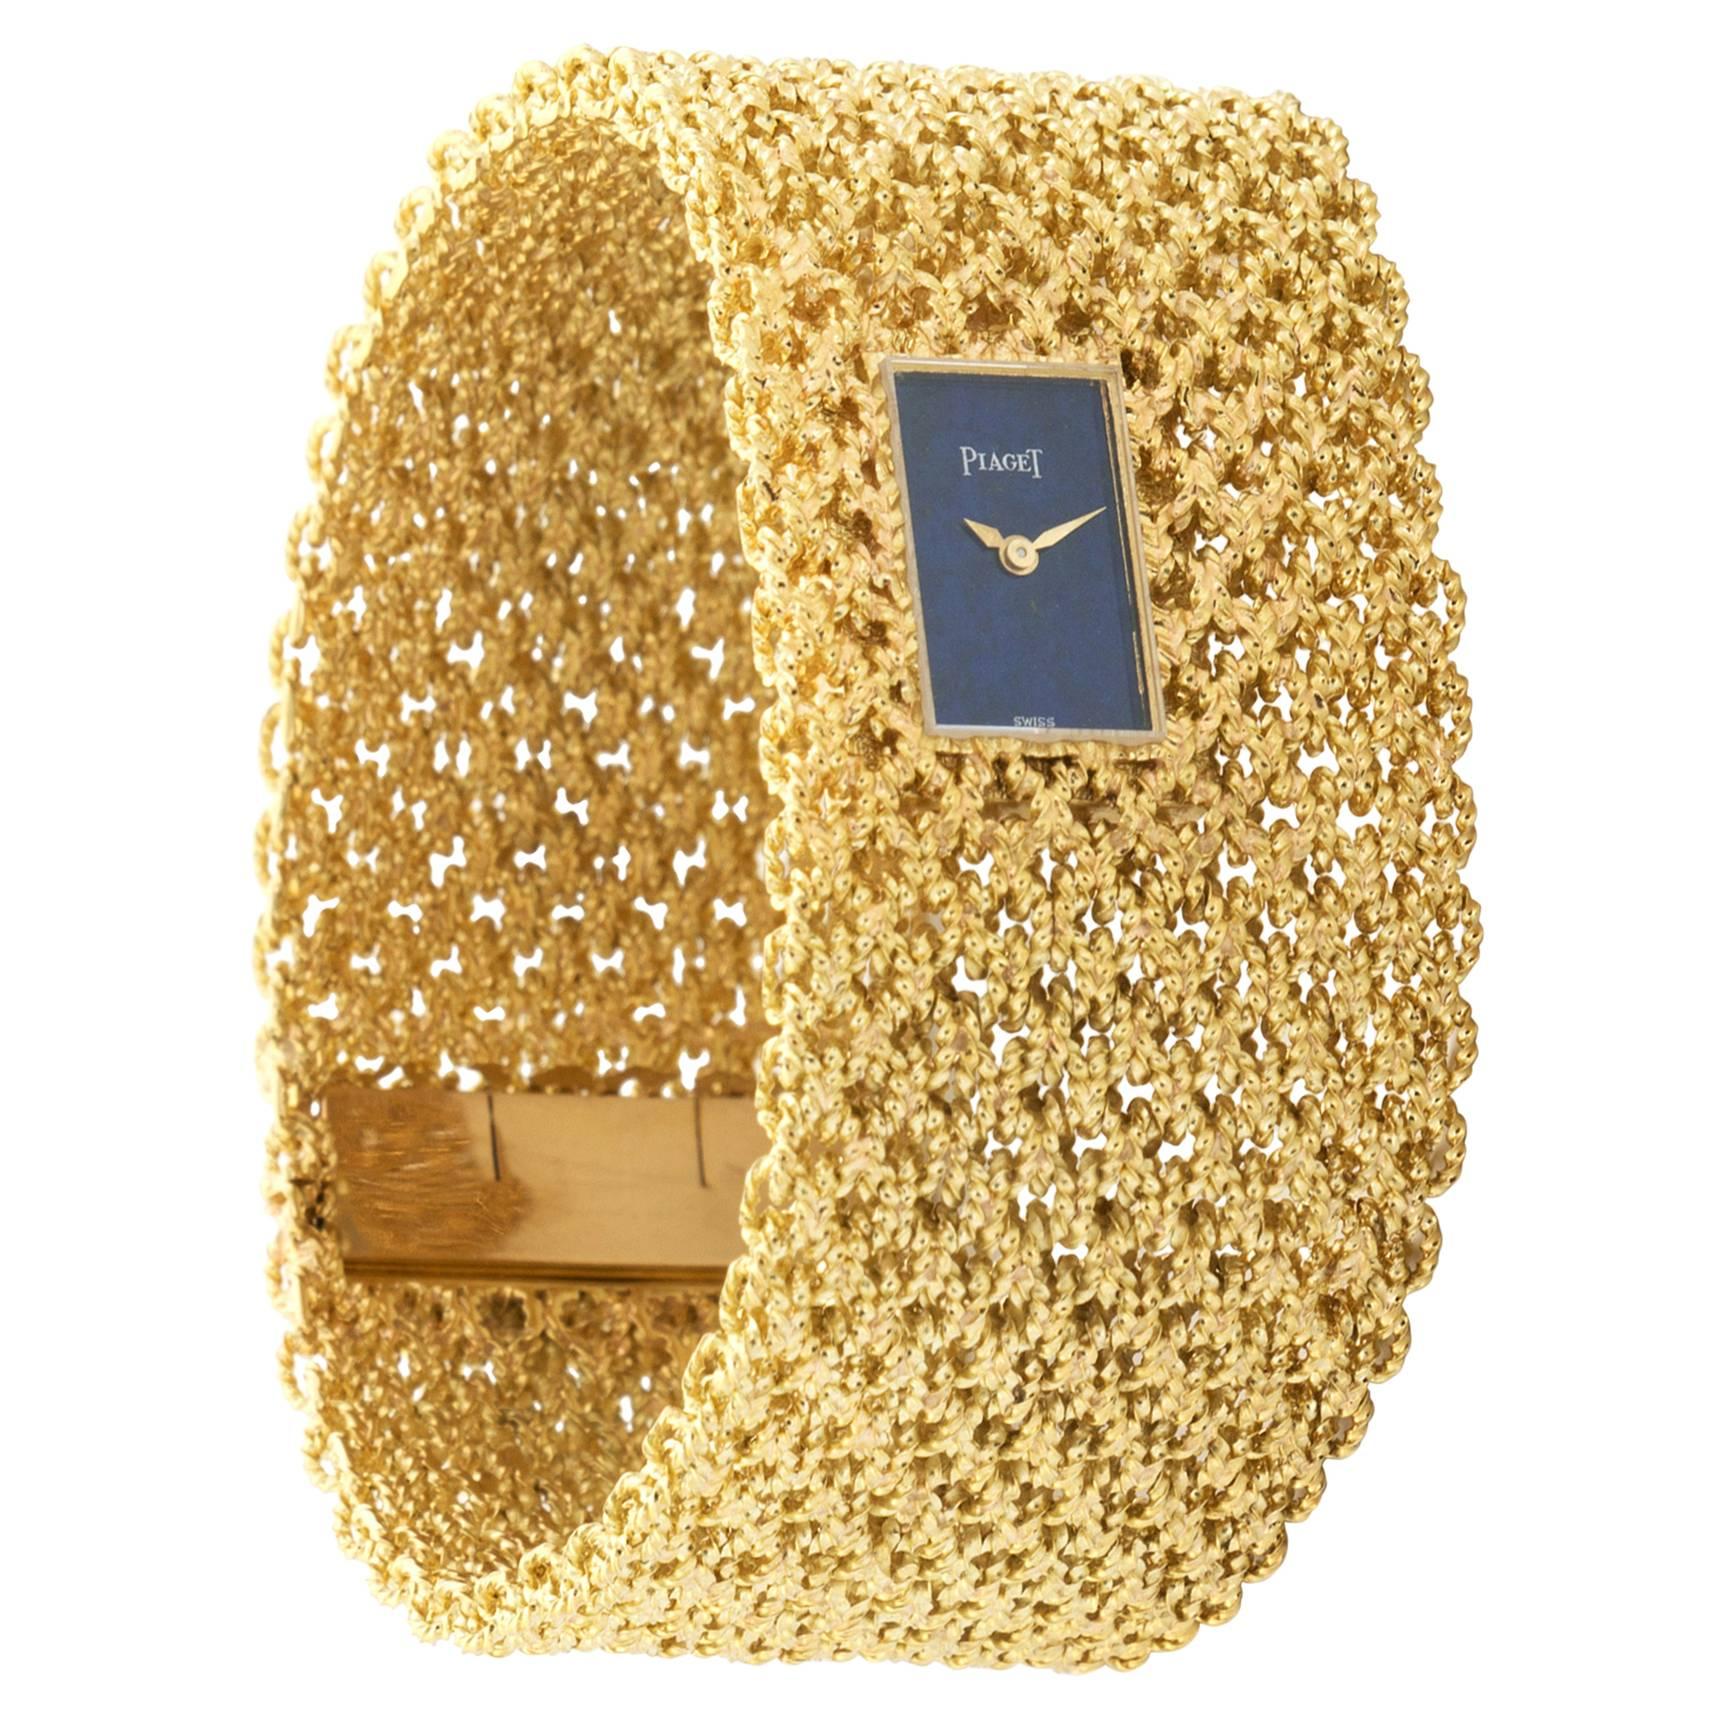 A Lady's Yellow Gold Wide Basket Weave Bracelet Watch by Piaget